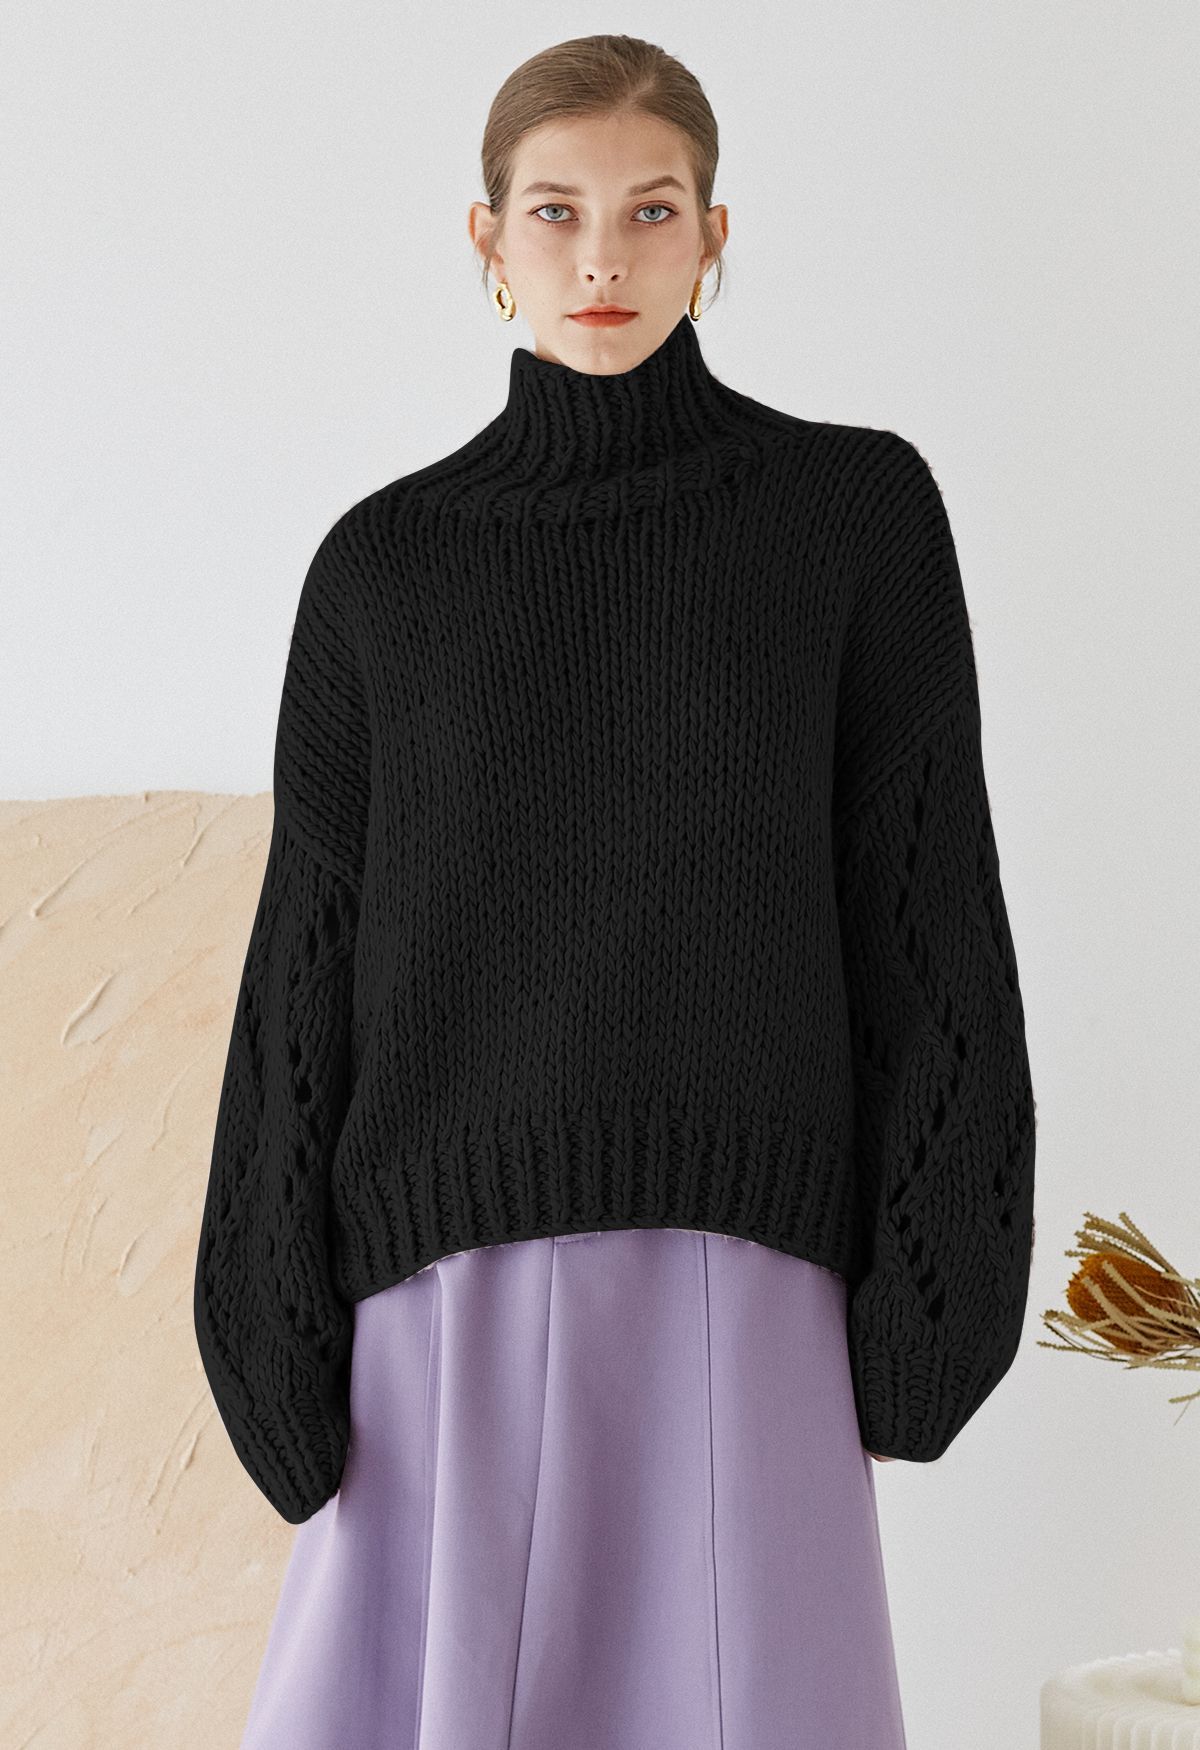 Pointelle Sleeve High Neck Hand-Knit Sweater in Black | Chicwish